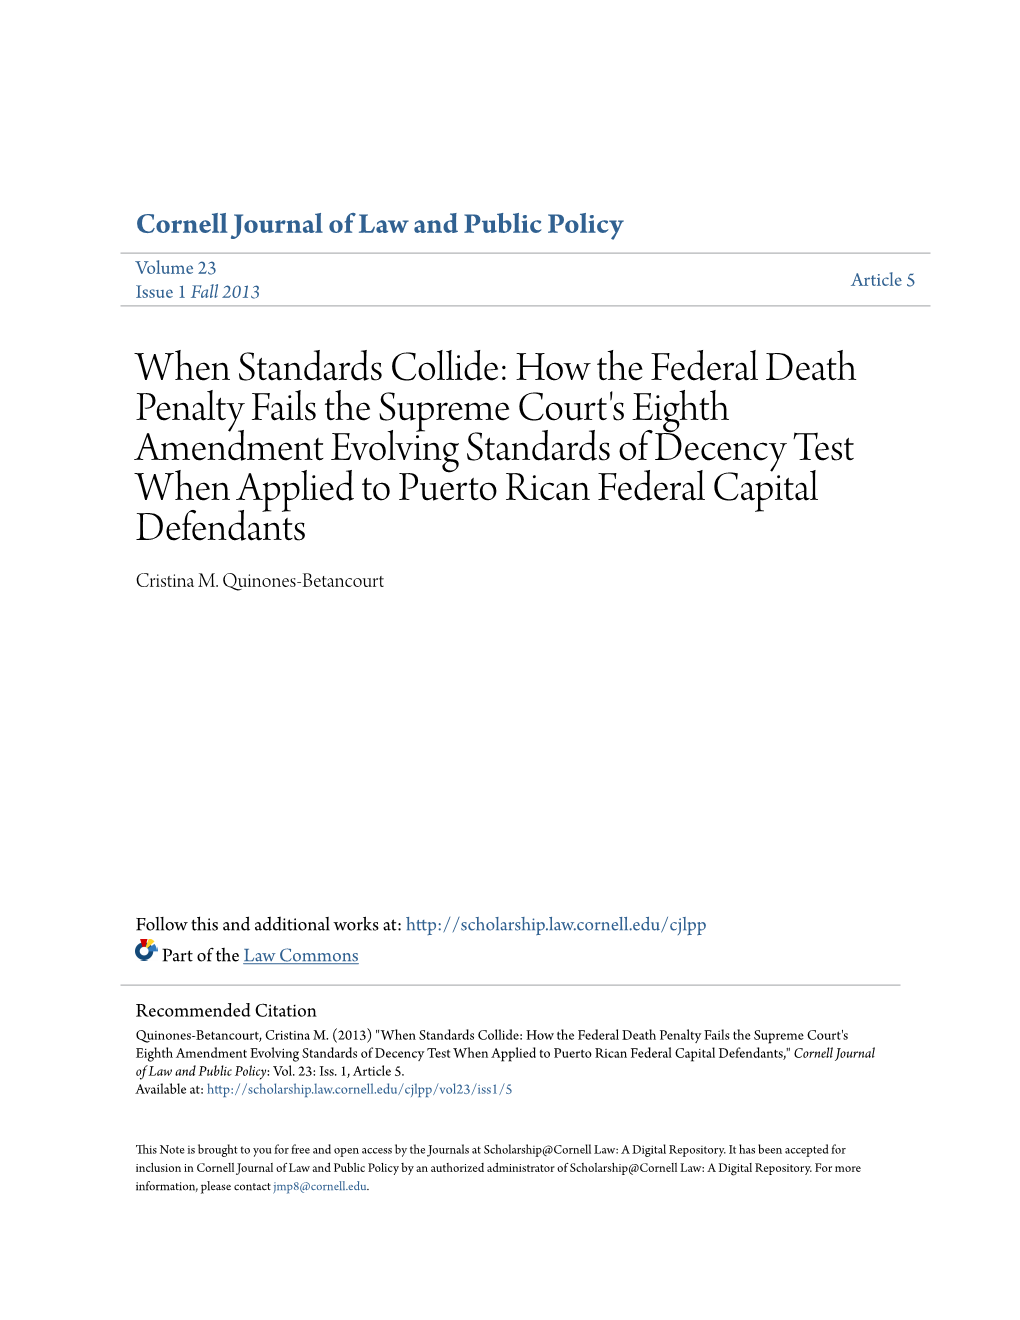 How the Federal Death Penalty Fails The